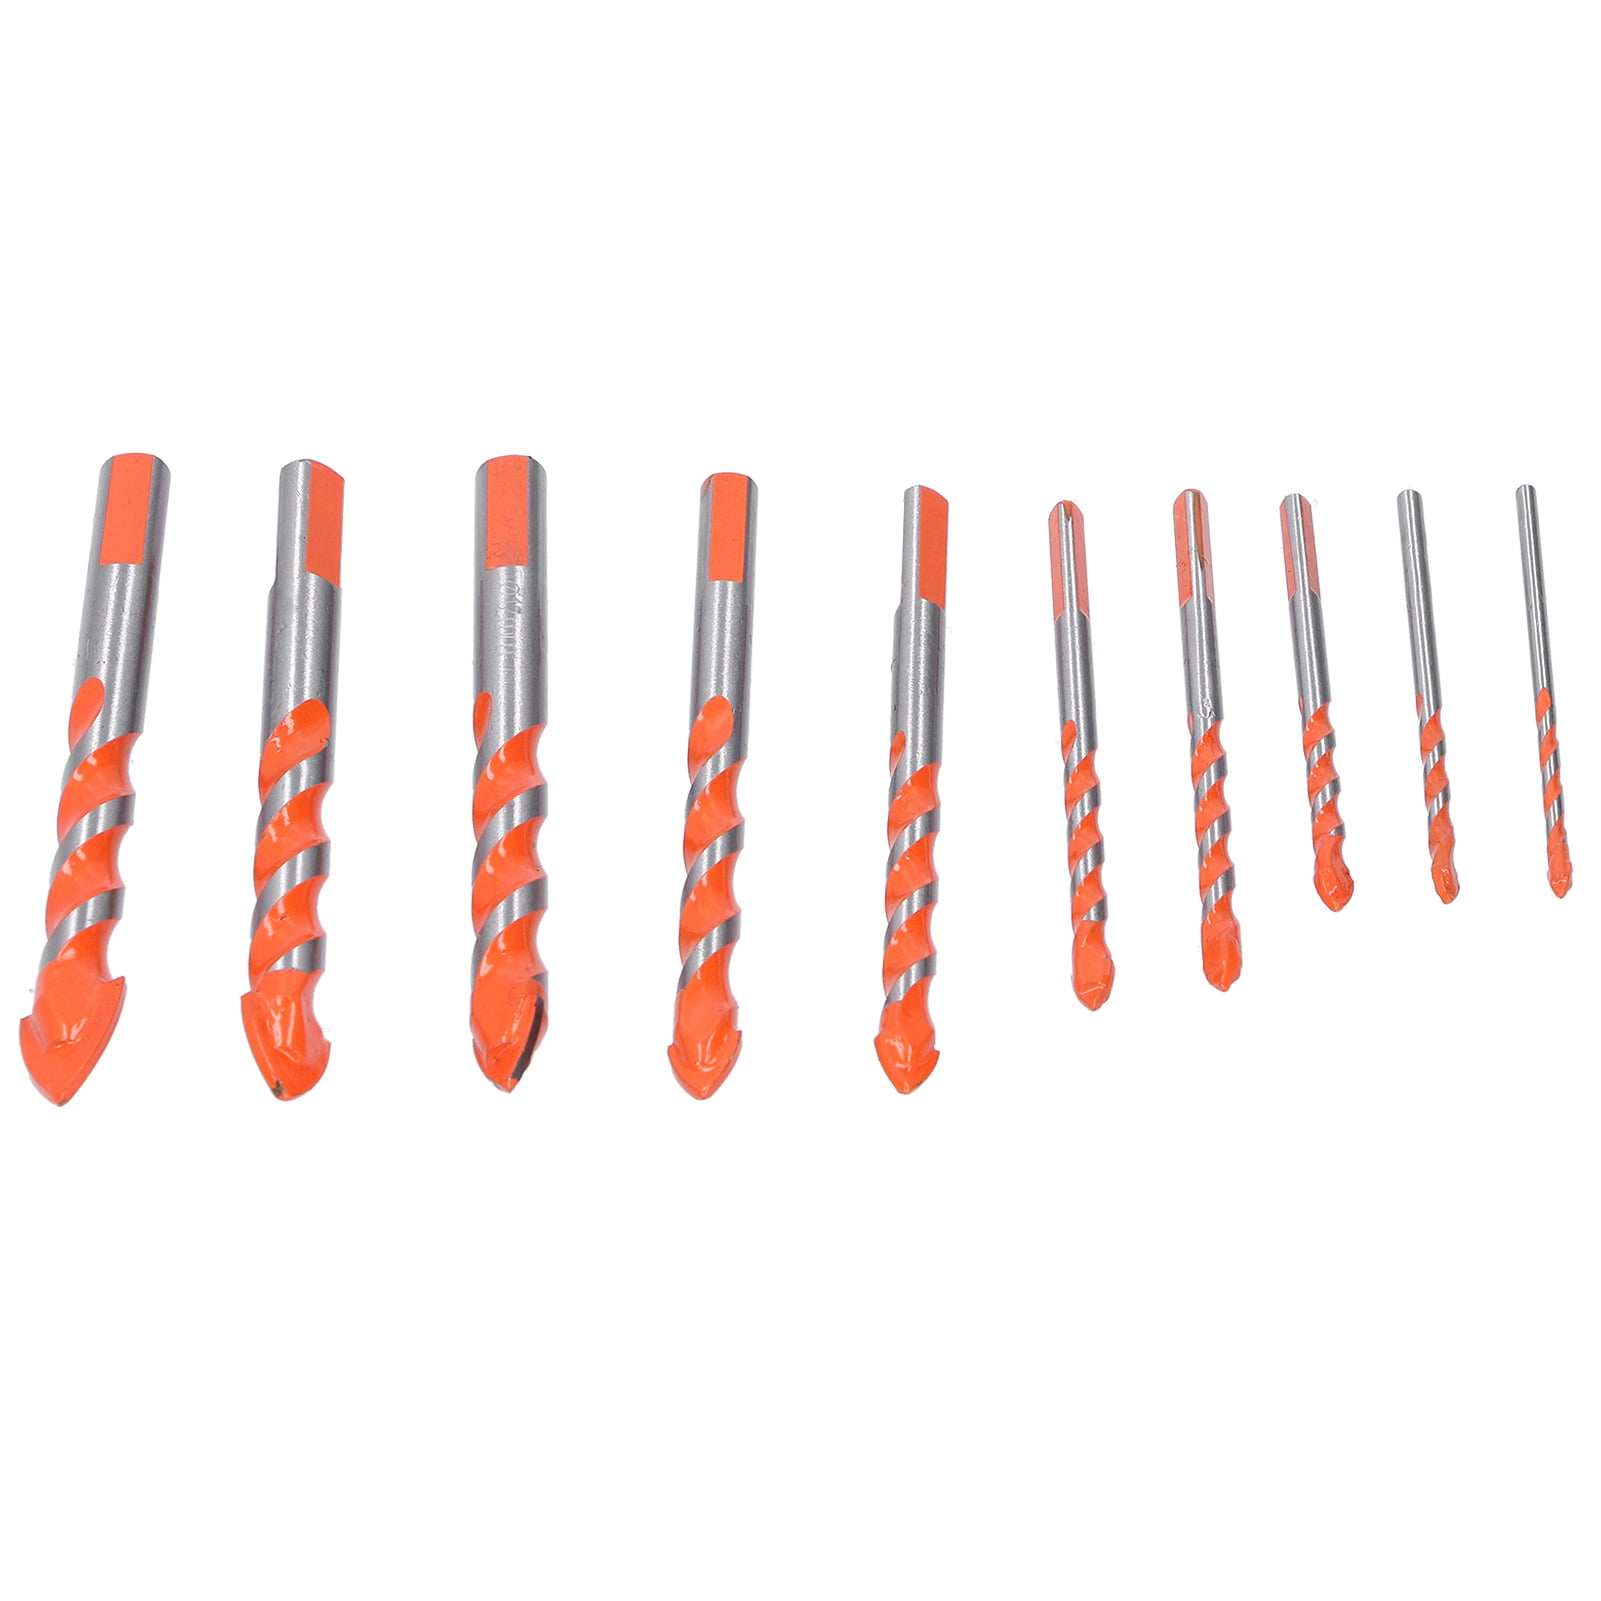 General Multifunctional Longer Life Drilling Bit Drill Bit Set Prevents Slipping Strong Toughness for Concrete Brick Glass Tiles